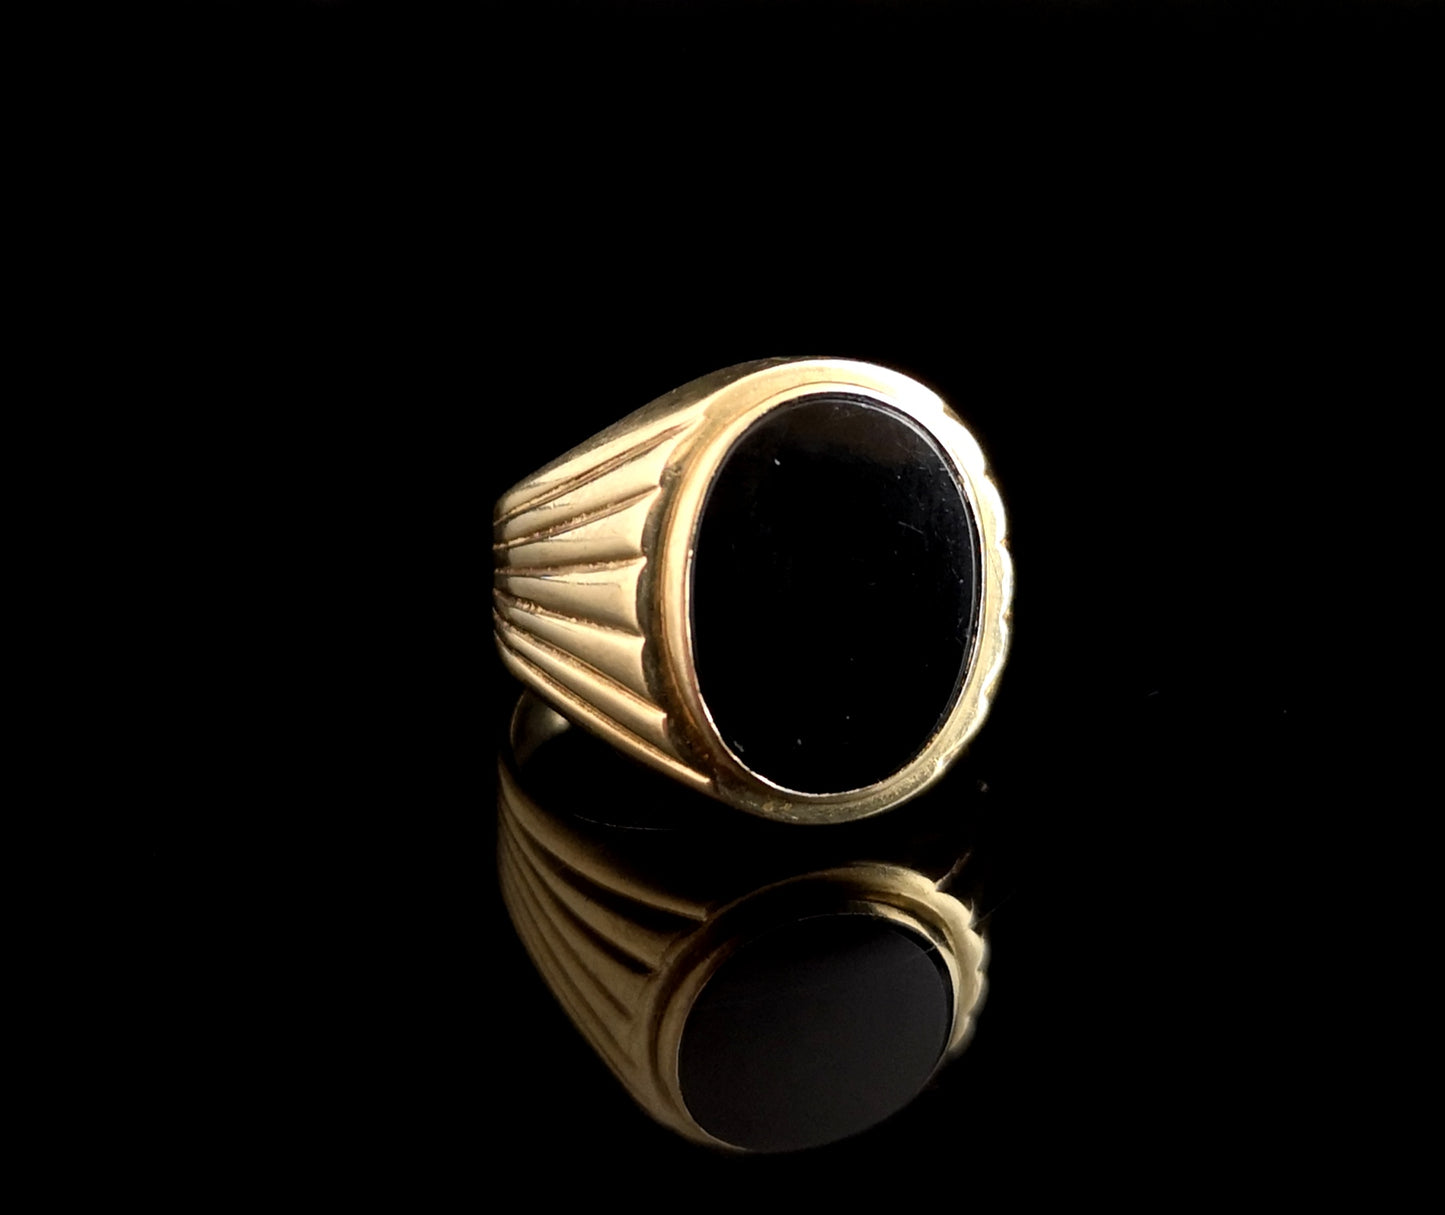 Vintage Gents Onyx signet ring, 9ct gold, heavy